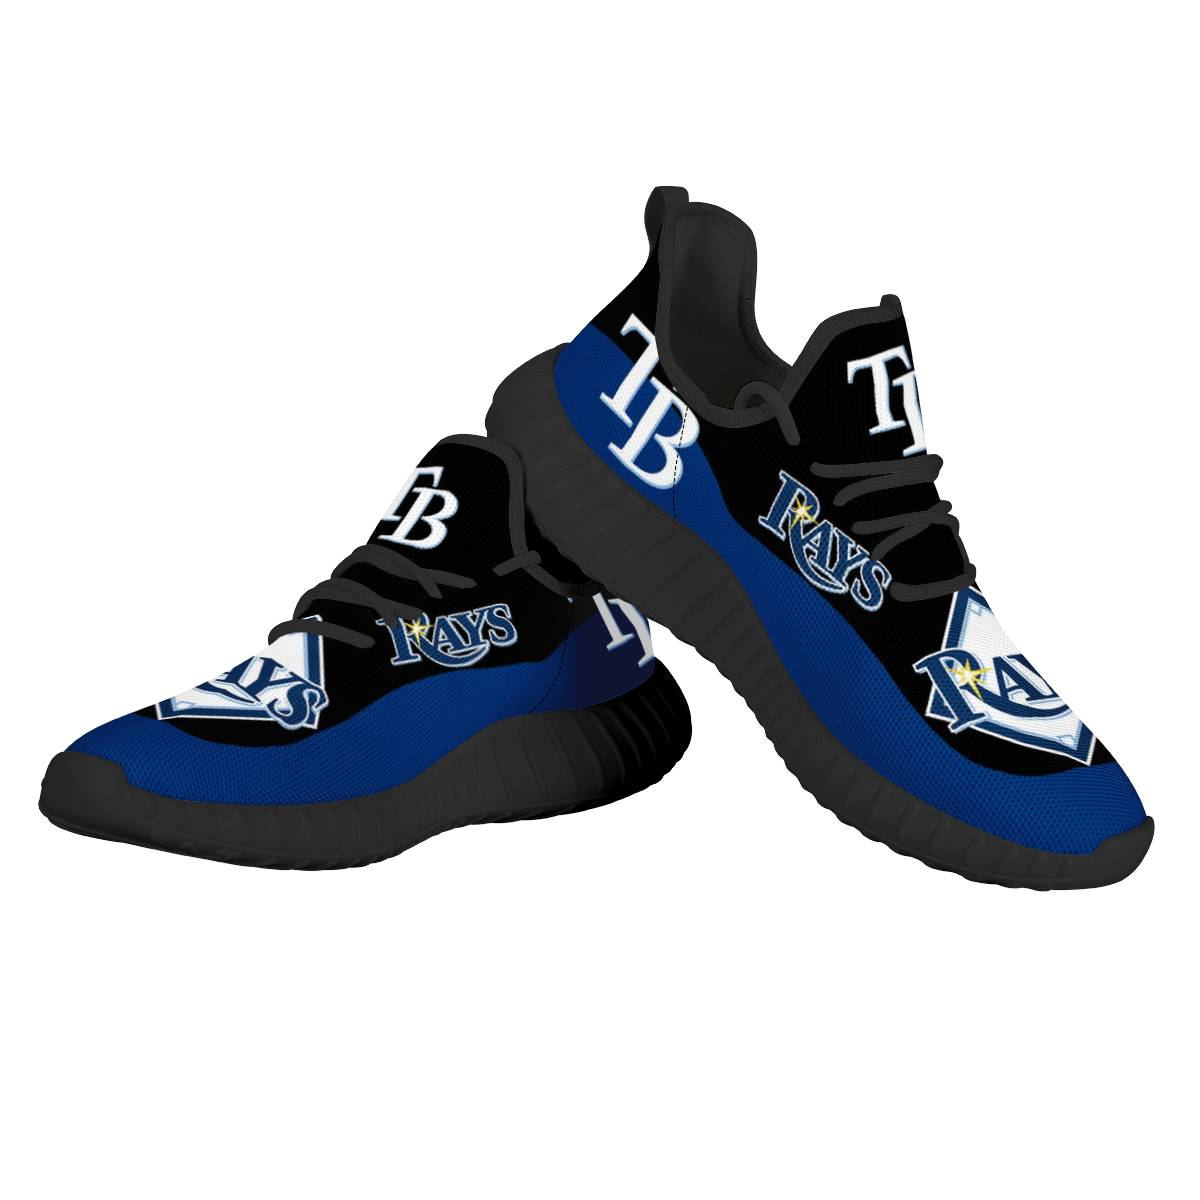 Men's MLB Tampa Bay Rays Mesh Knit Sneakers/Shoes 001